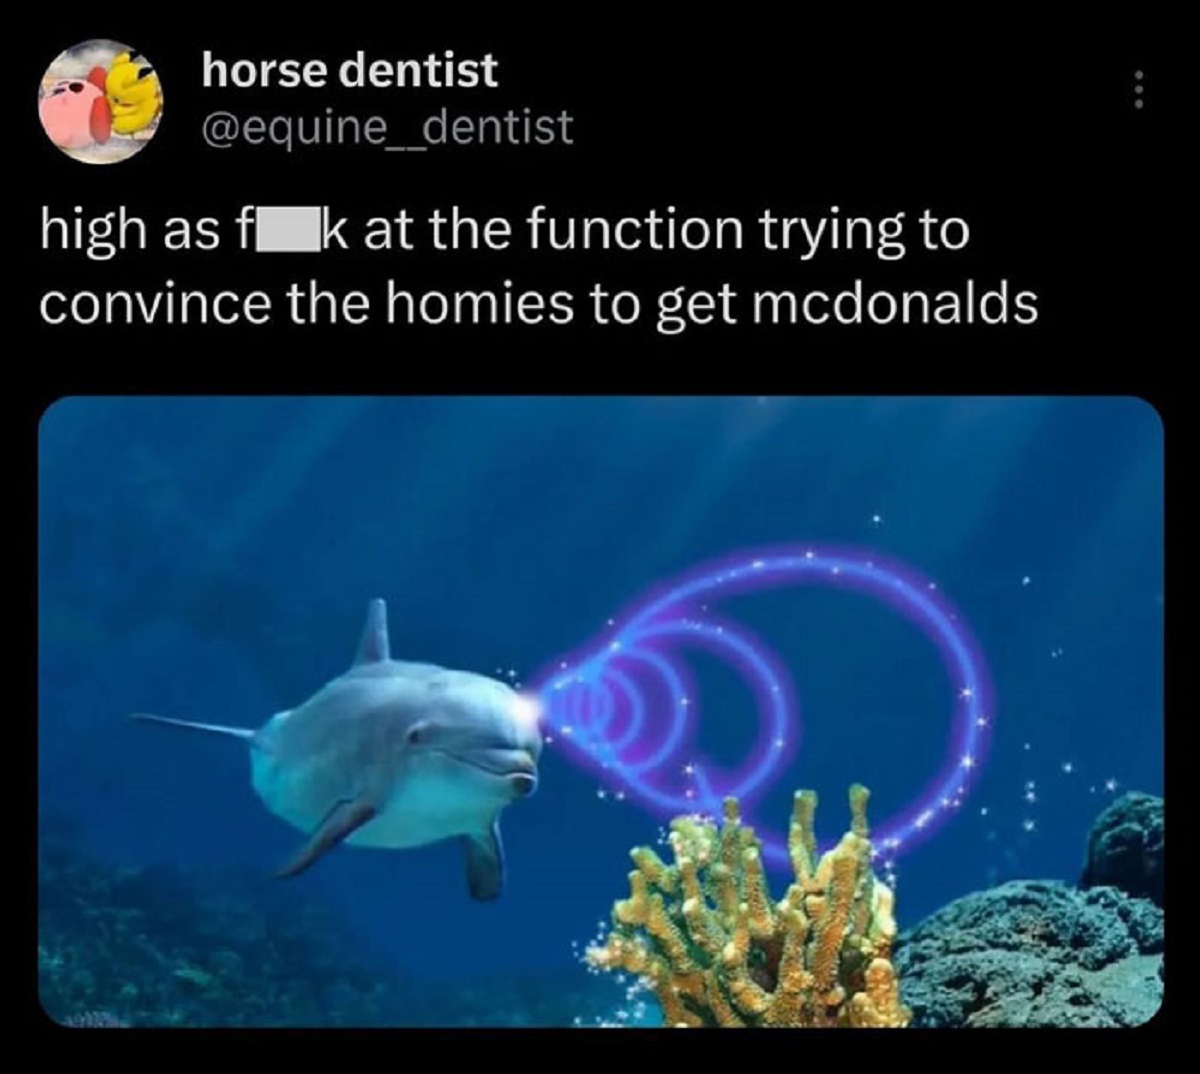 marine biology - horse dentist high as fk at the function trying to convince the homies to get mcdonalds